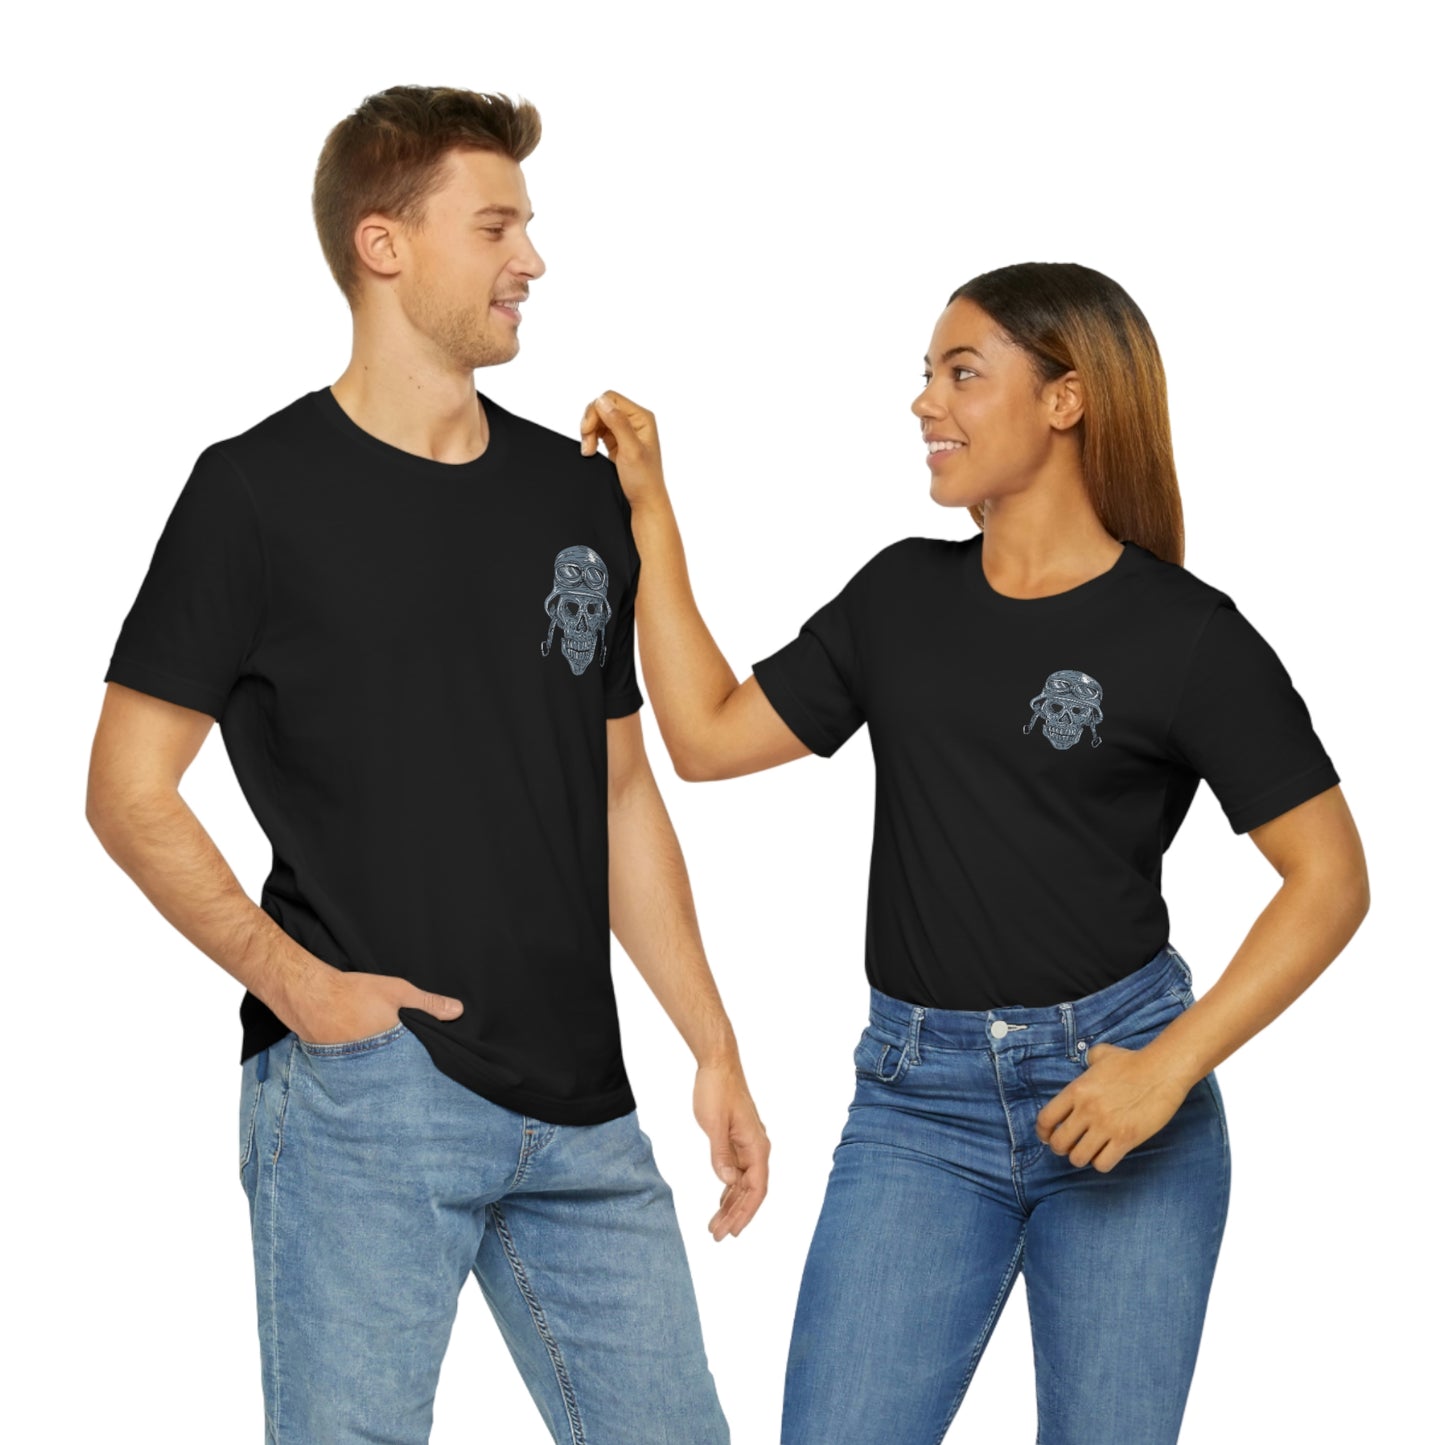 Unisex Jersey Short Sleeve Tee: Motorcycle Riders:  Fly Free and Ride